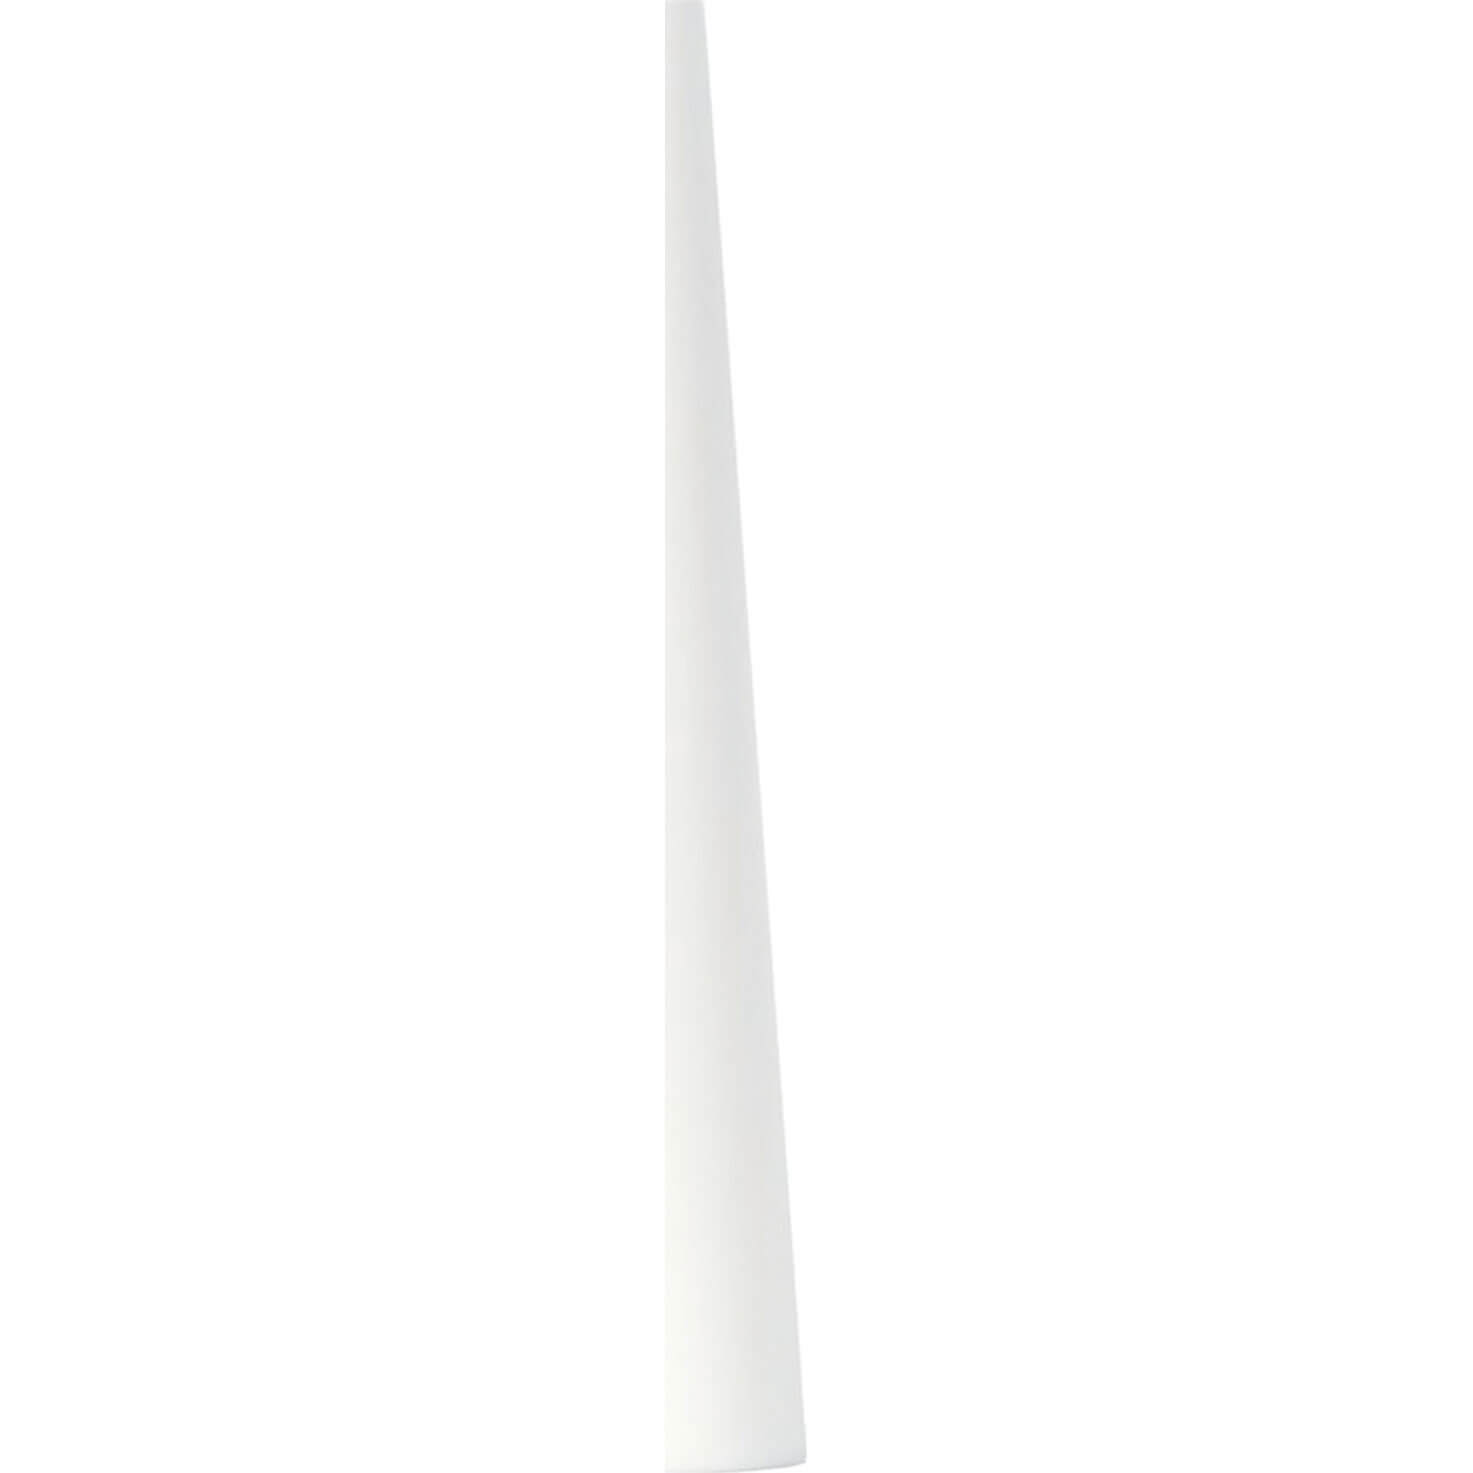 Image of LED Lenser Signal Cone for B7, L7, M7R, P7, P7R, P7QC, T7M and T7.2 Torches White